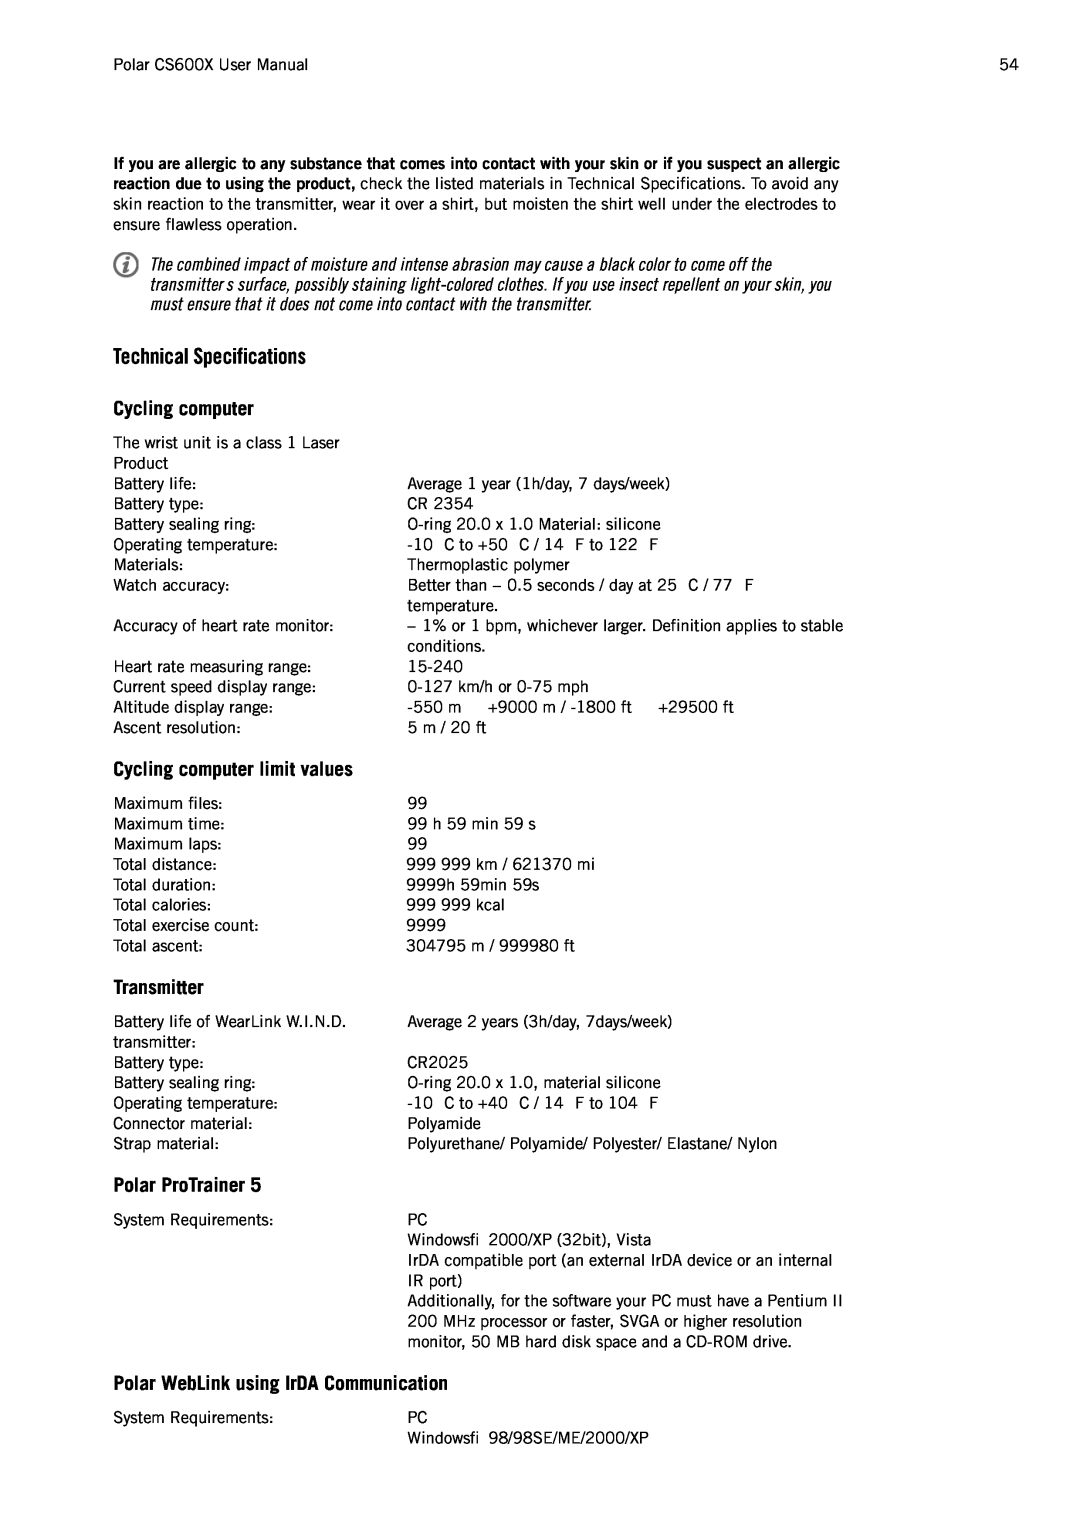 Polar CS600X user manual Technical Specifications, Cycling computer limit values, Transmitter, Polar ProTrainer 